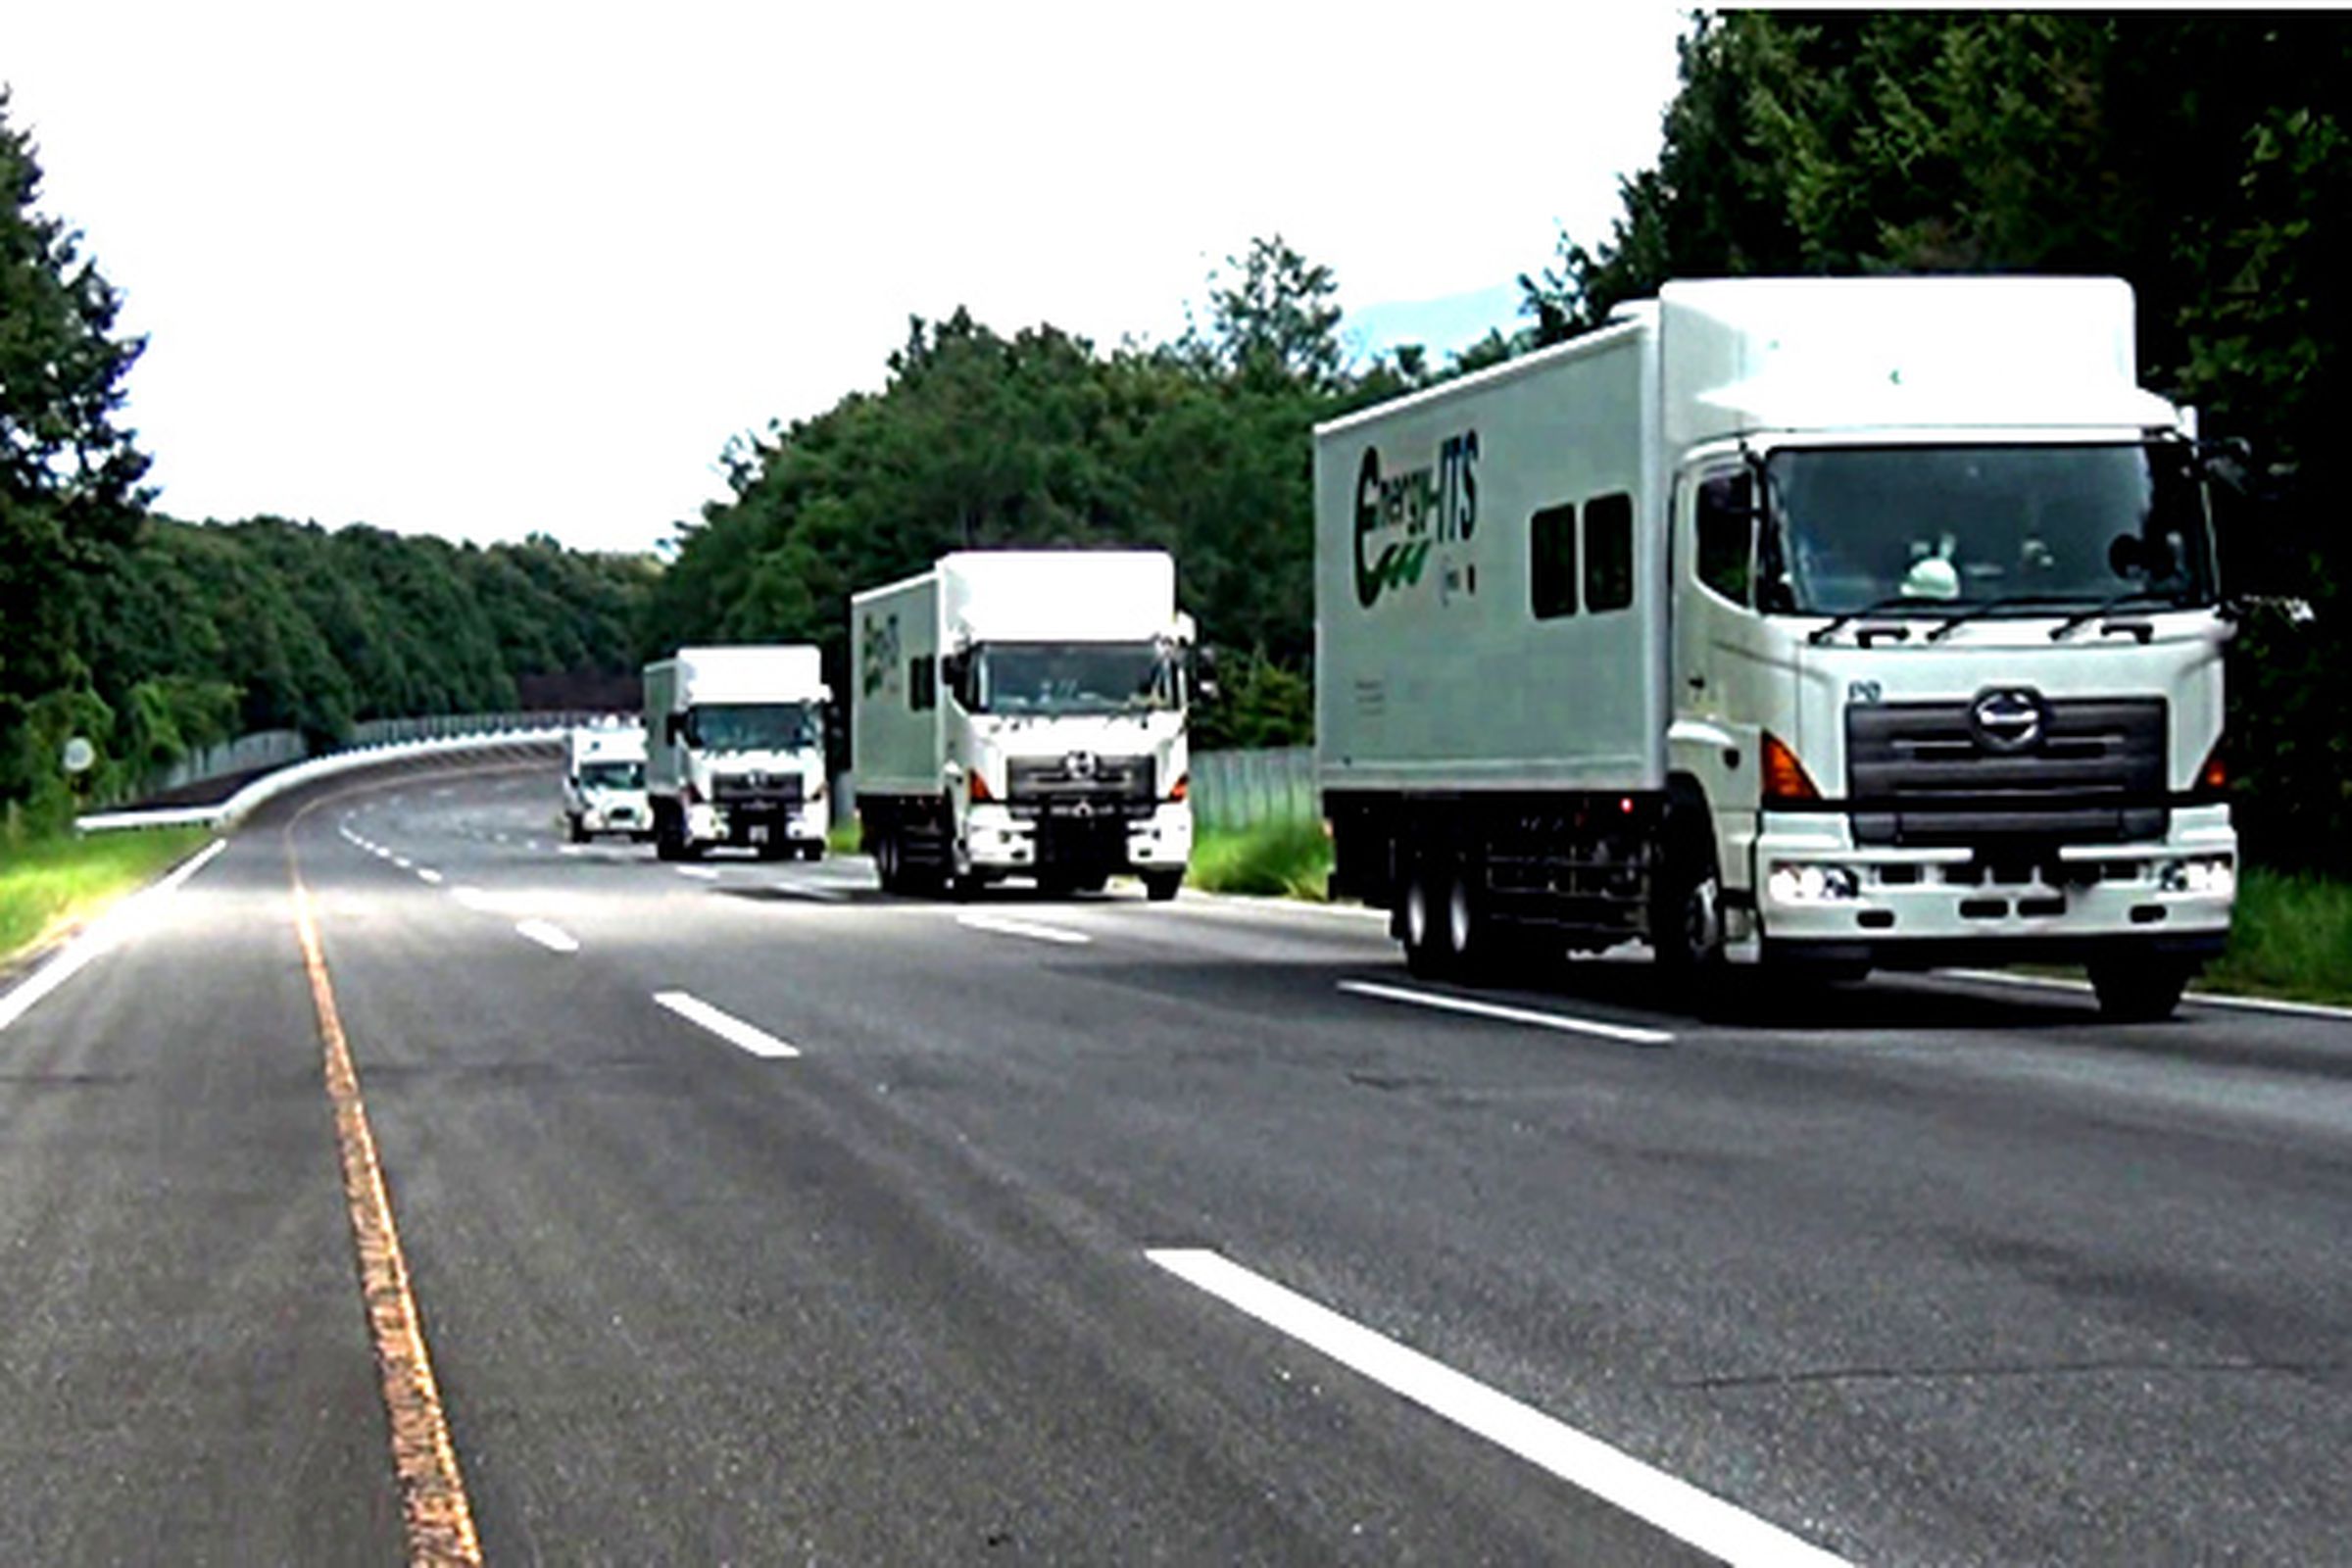 Self-driving trucks tested in Japan by NEDO. 